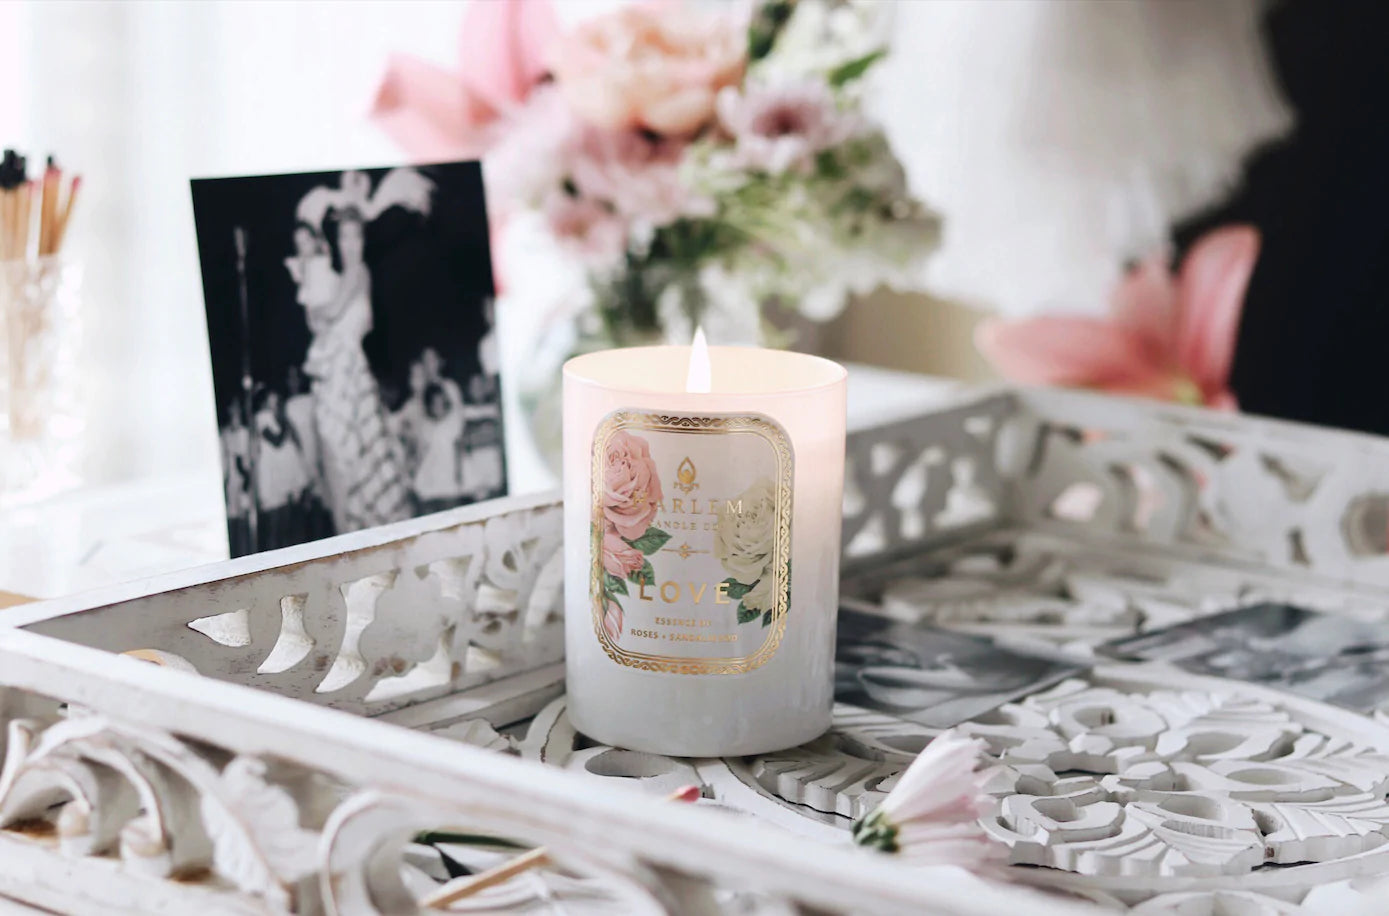 This is an image of our Love candle in a lifestyle setting.